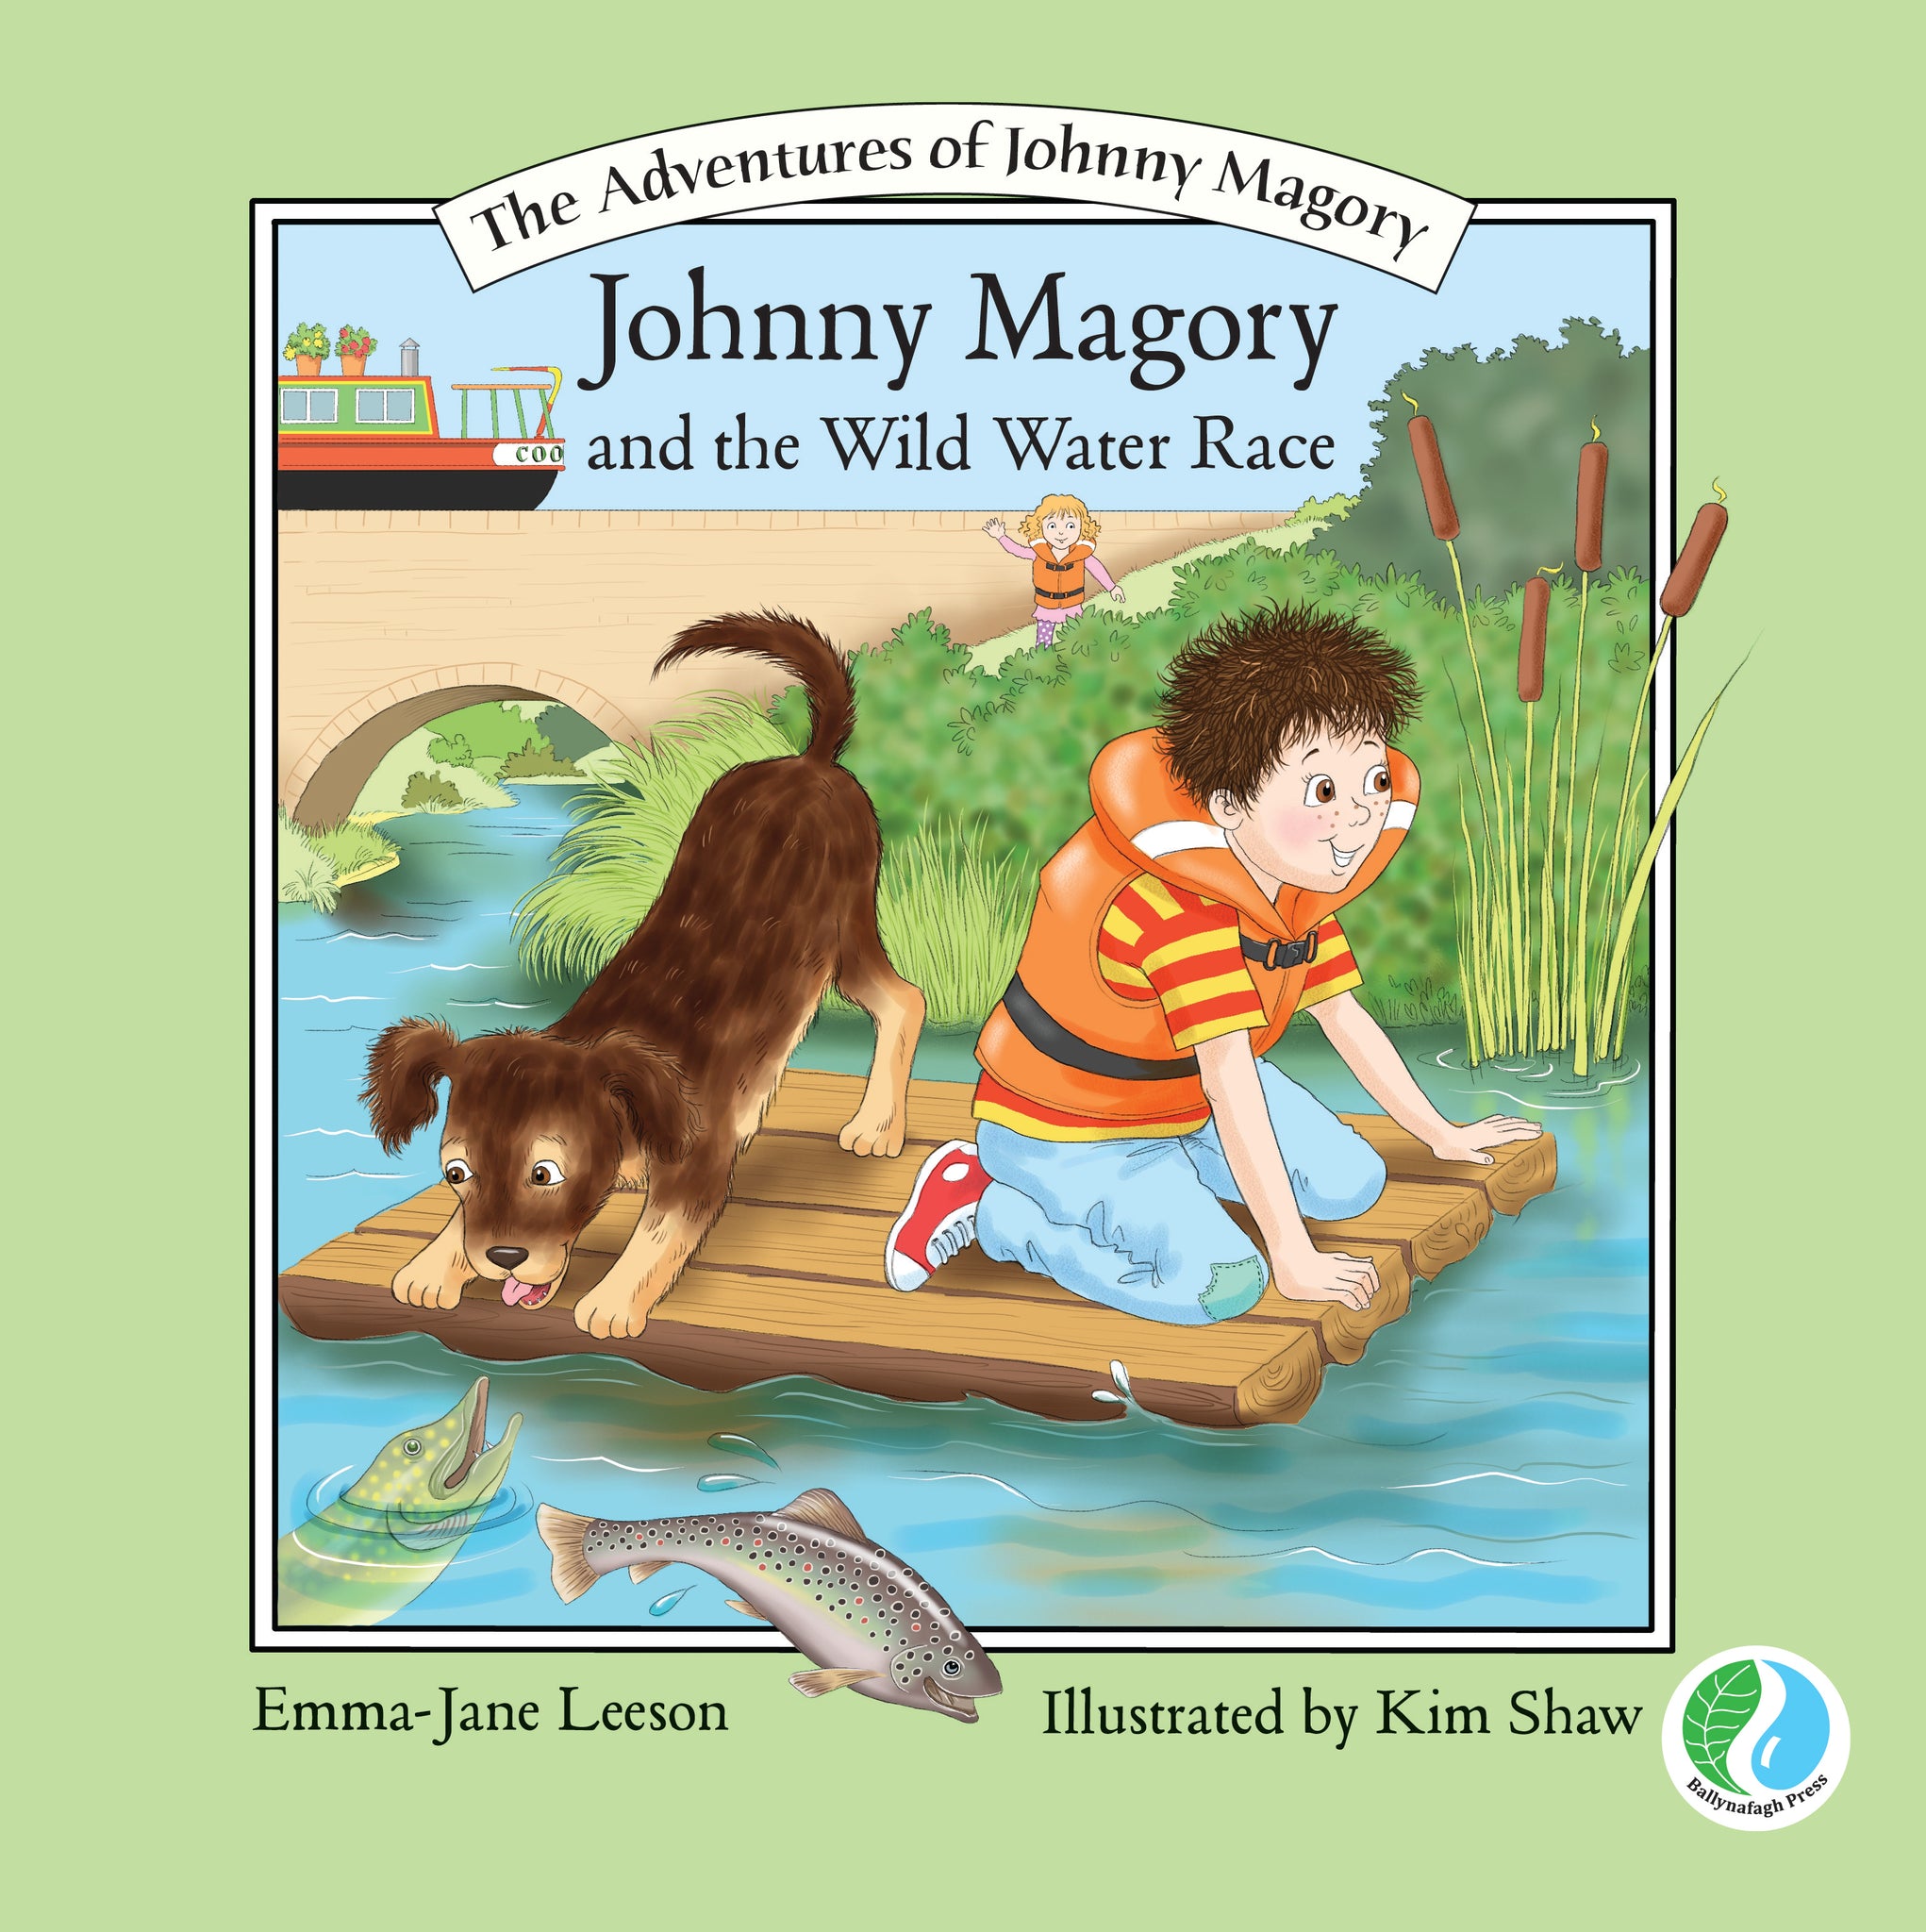 Johnny Magory and the Wild Water Race (Hardcopy)